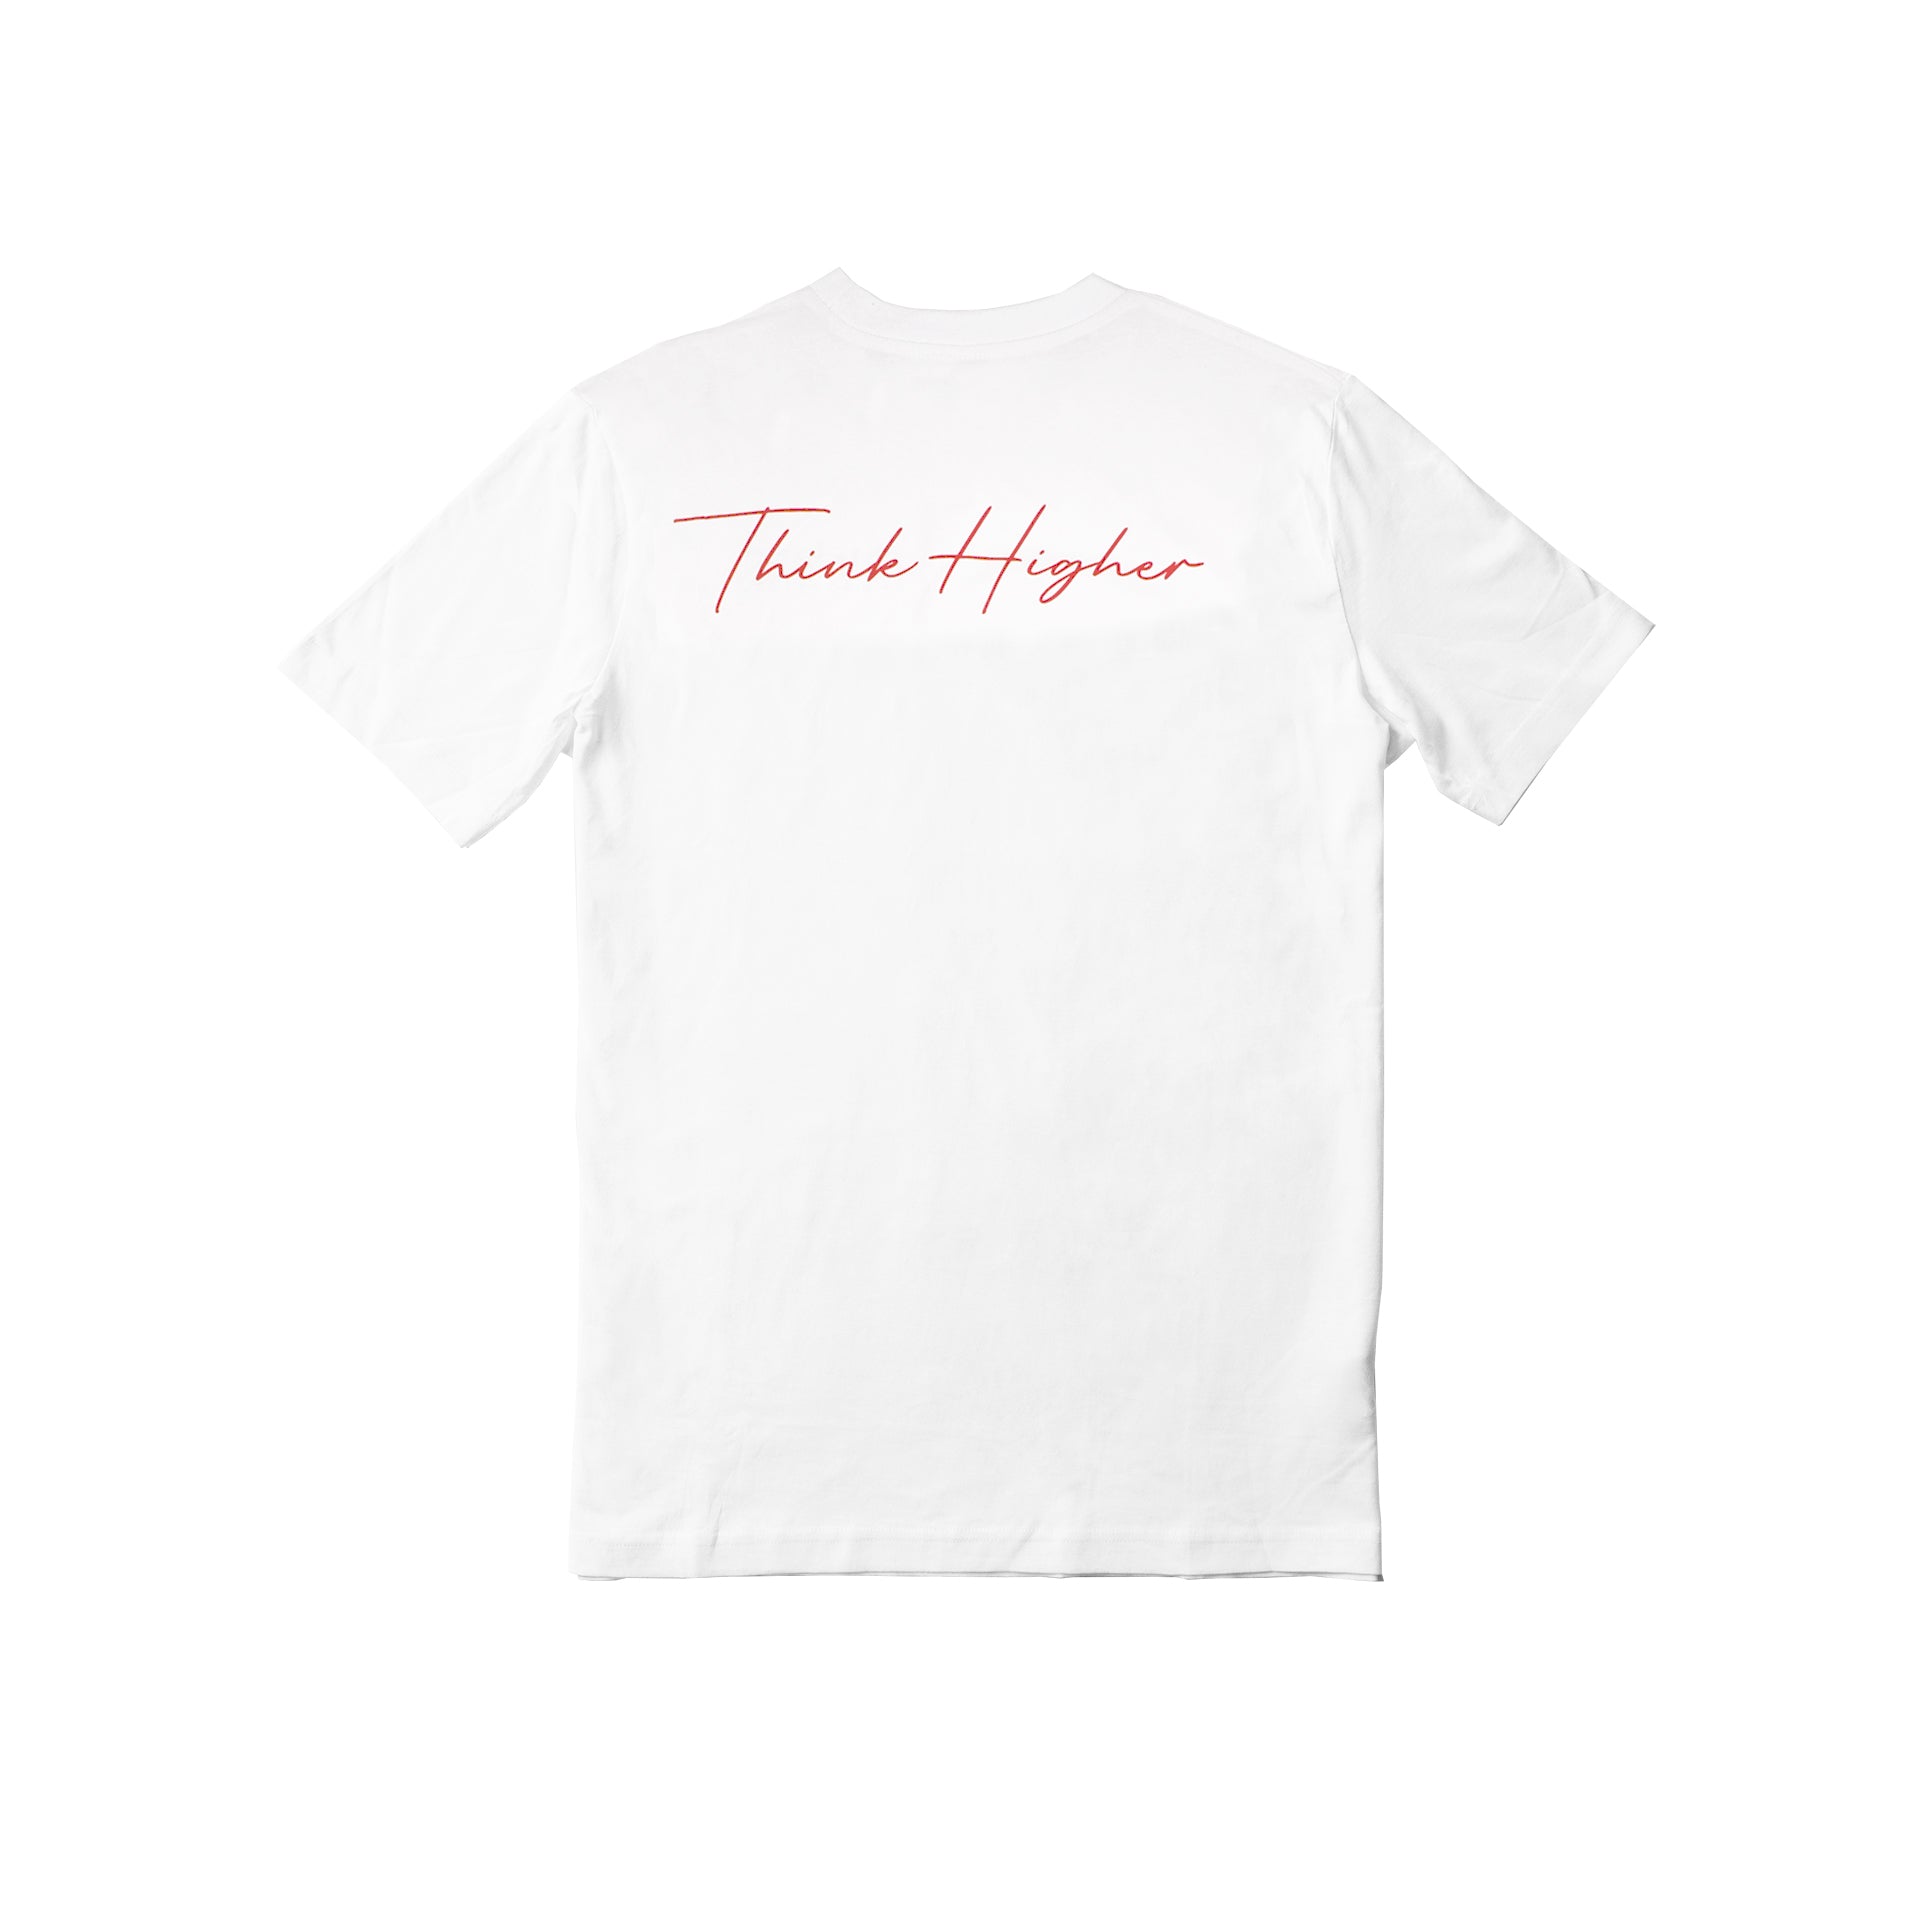 T-shirt - 'Think Higher' - Red